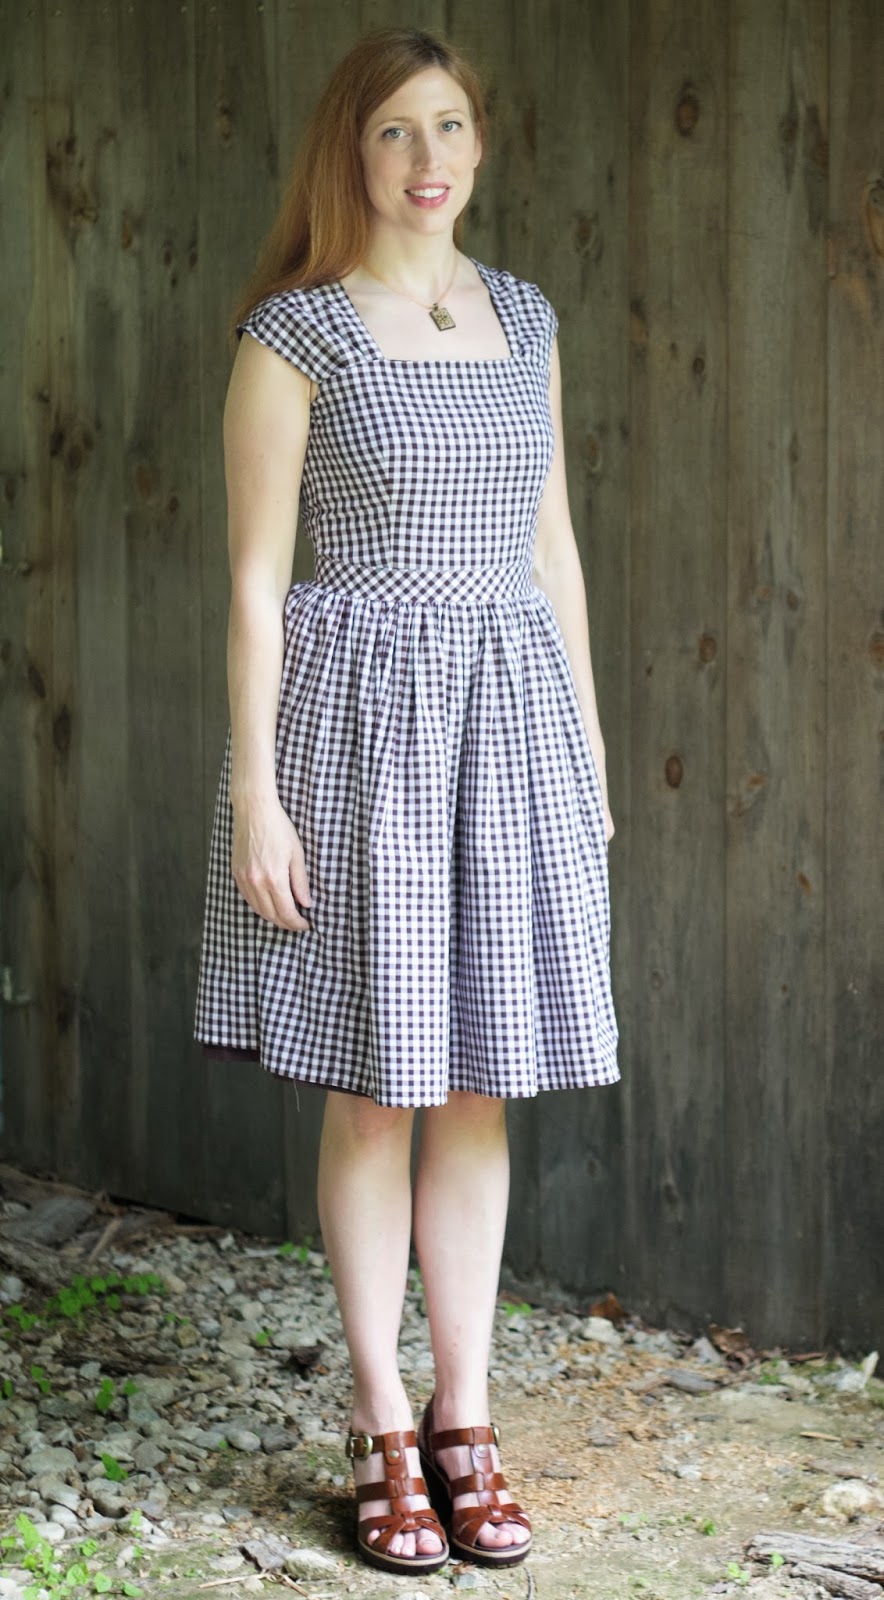 craftyNHmom: completed: Gingham Cambie Dress